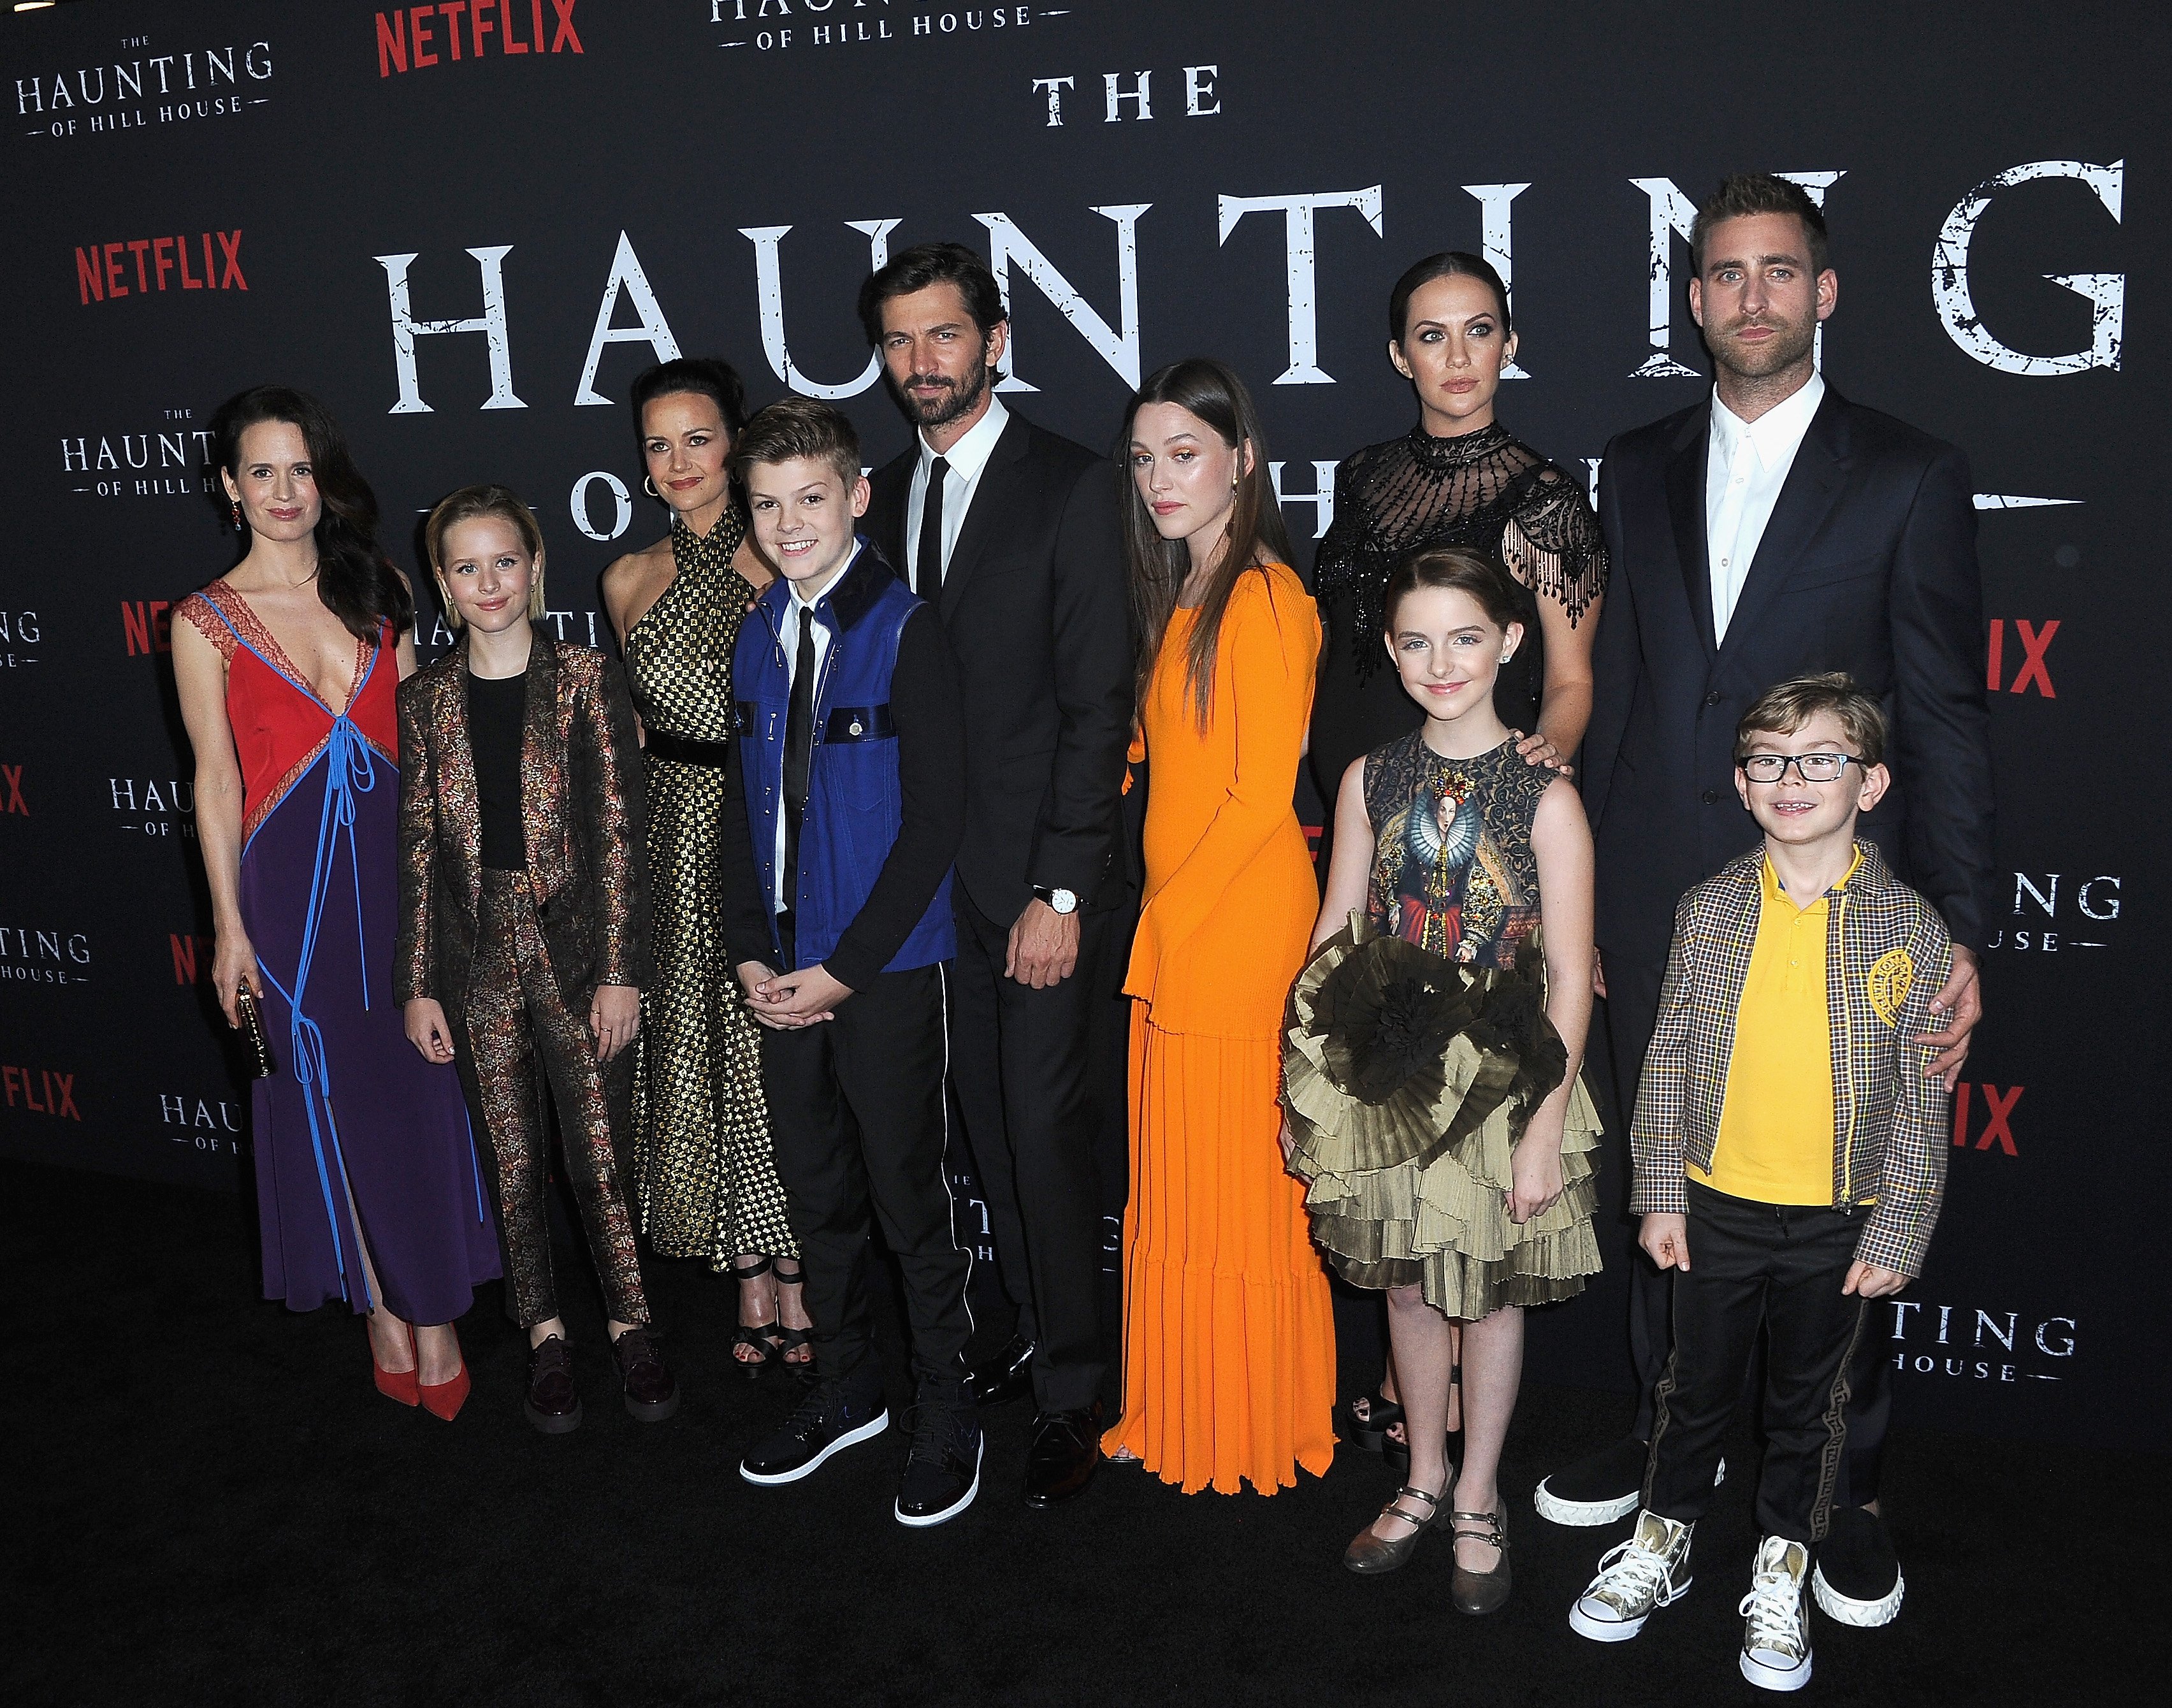 The cast of Netflix's 'The Haunting Of Hill House' poses together at the premiere